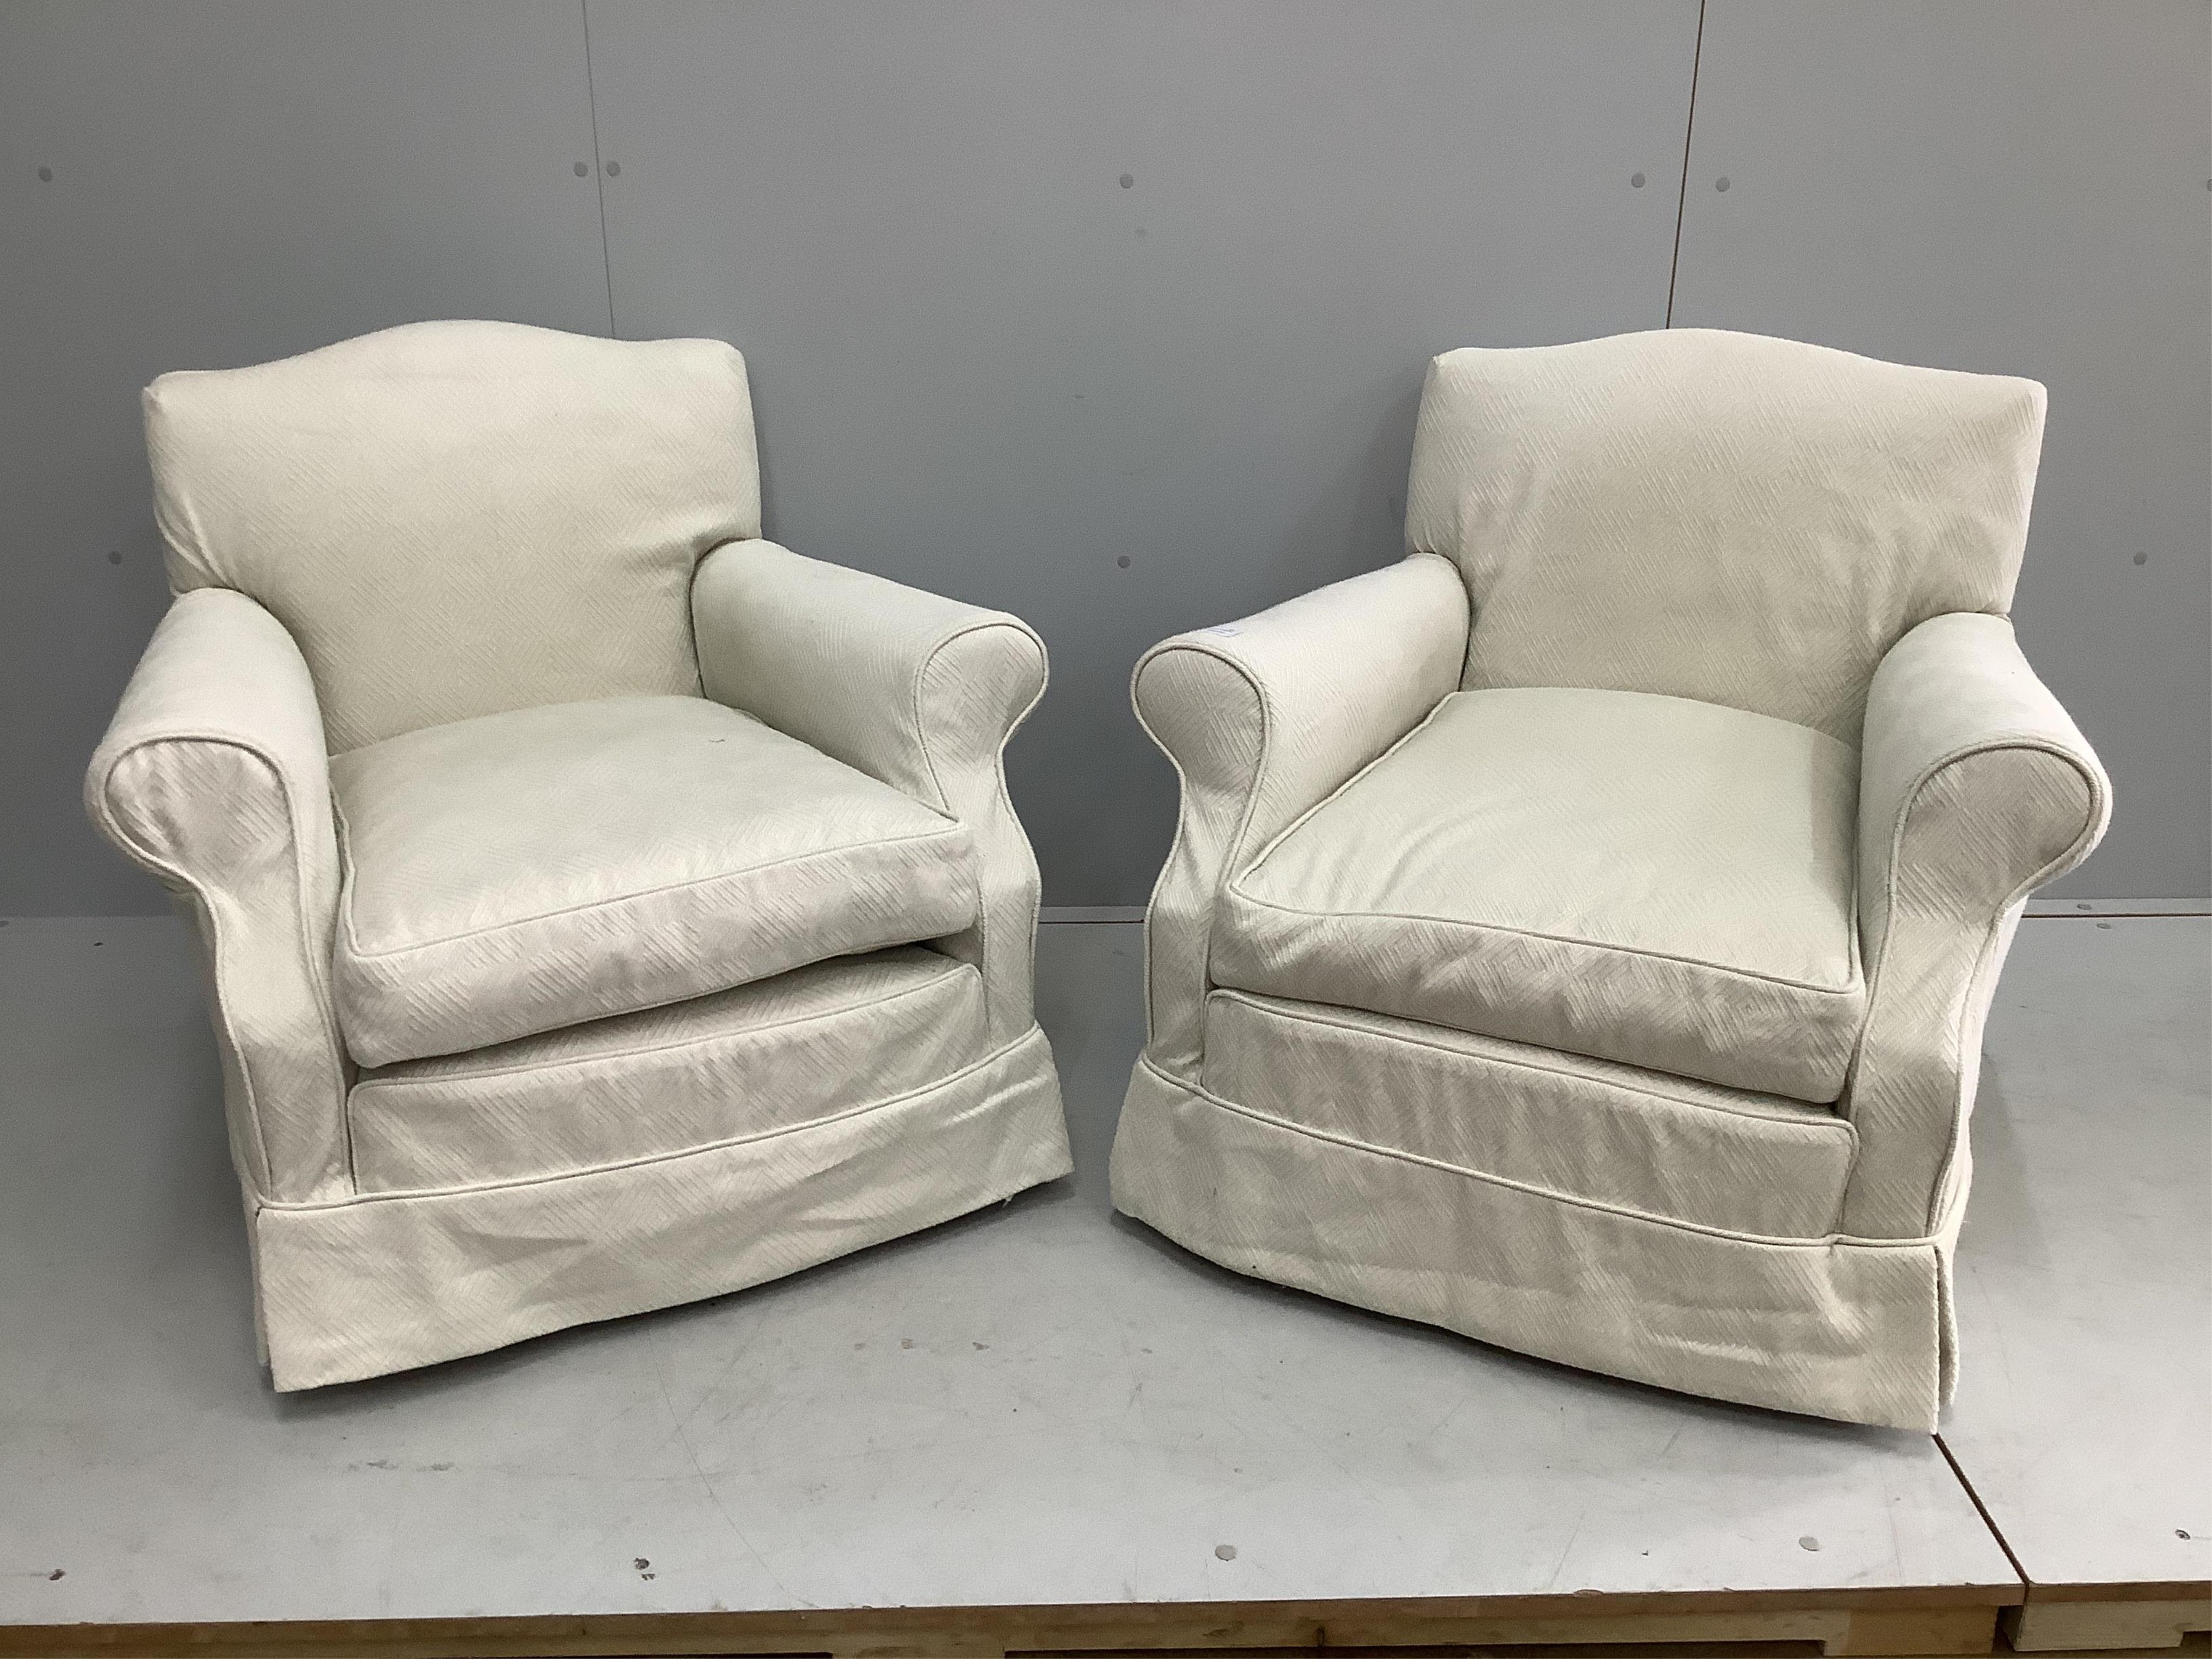 A pair of Contemporary upholstered armchairs, width 80cm, depth 76cm, height 74cm. Condition - fair